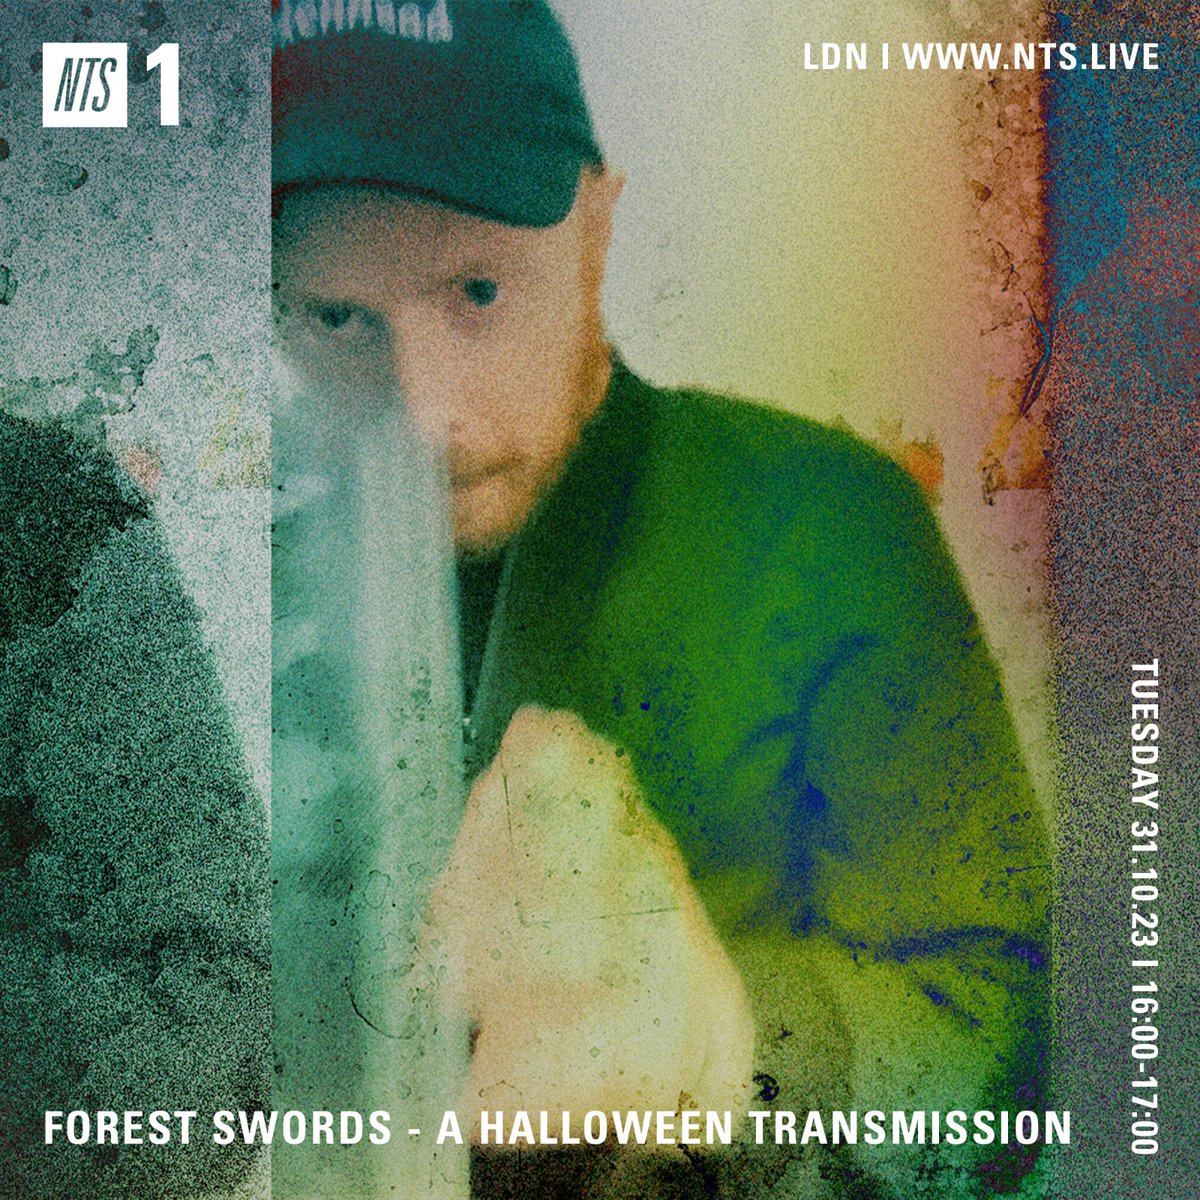 Join me for deep Halloween frequencies from the @NTSlive studios this afternoon // 4pm GMT and archived afterwards 🔩🎃